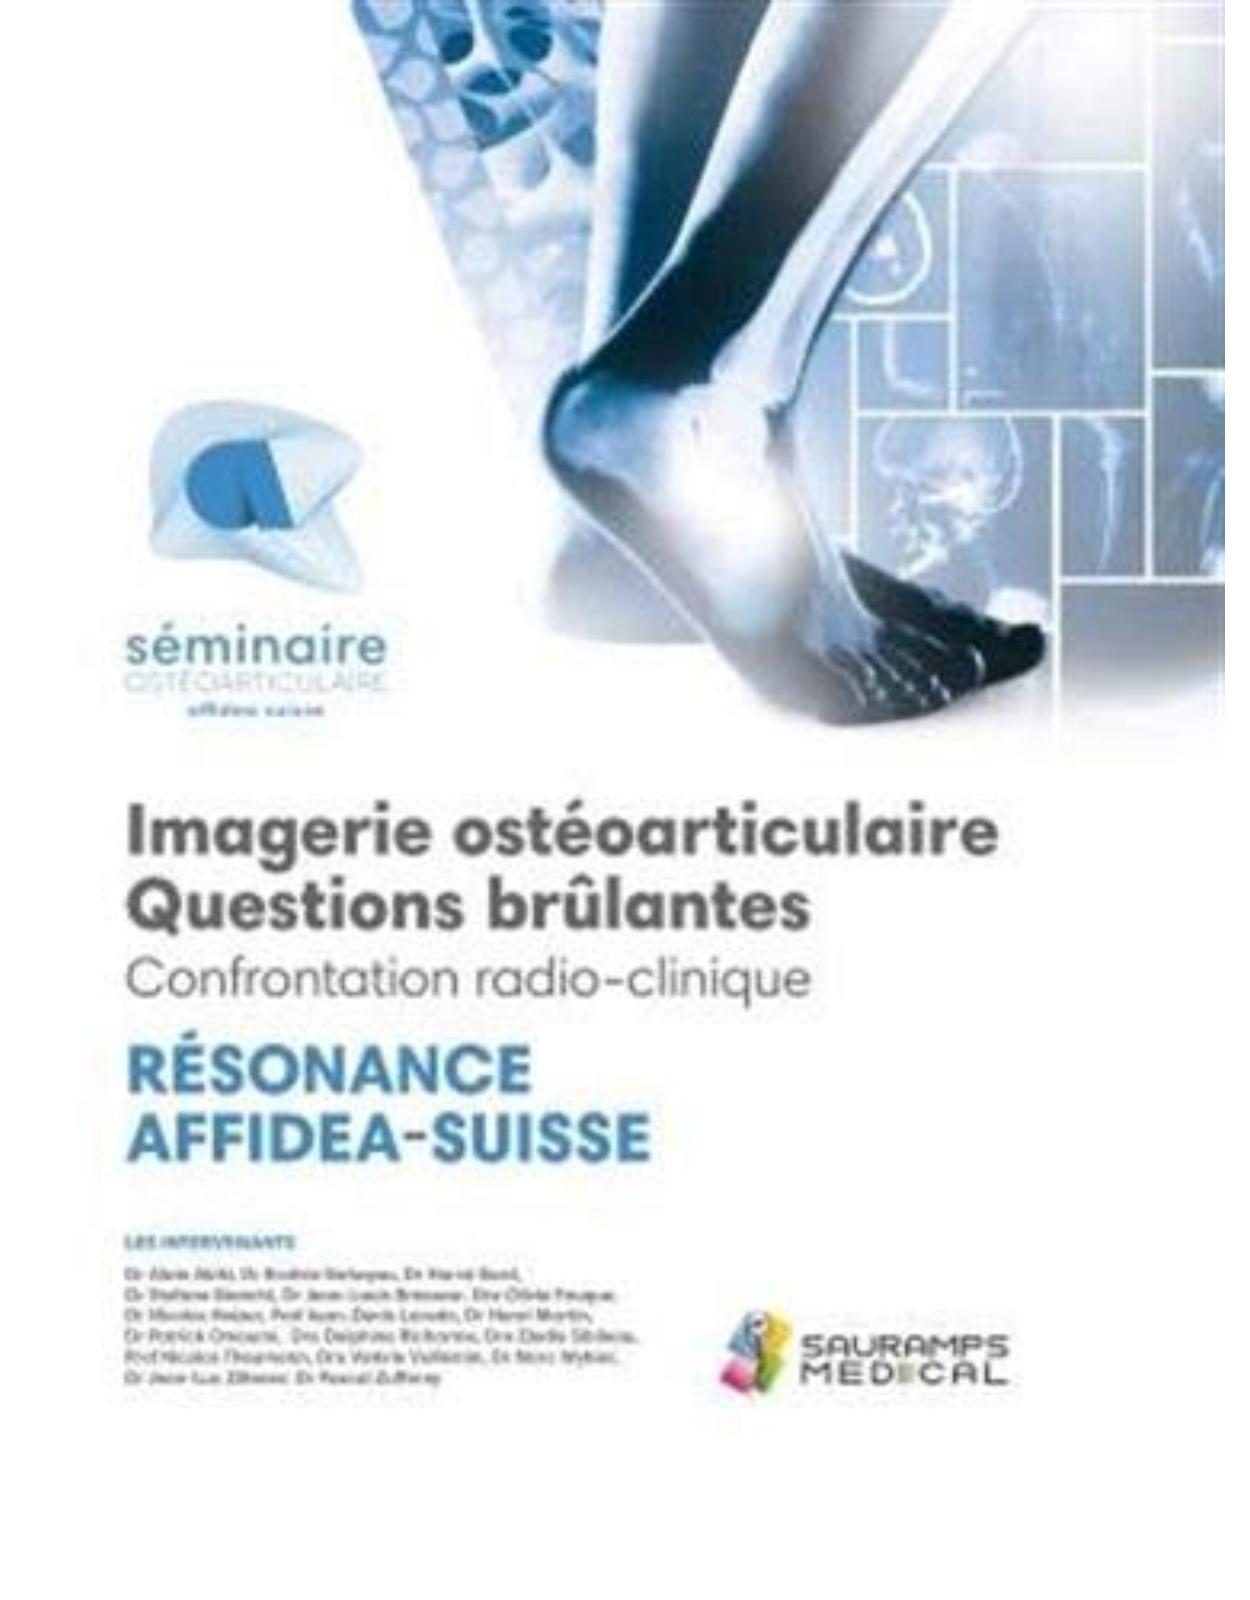 AFFIDEA IMAGERIE OSTEO-ARTICULAIRE QUESTIONS BRULANTES